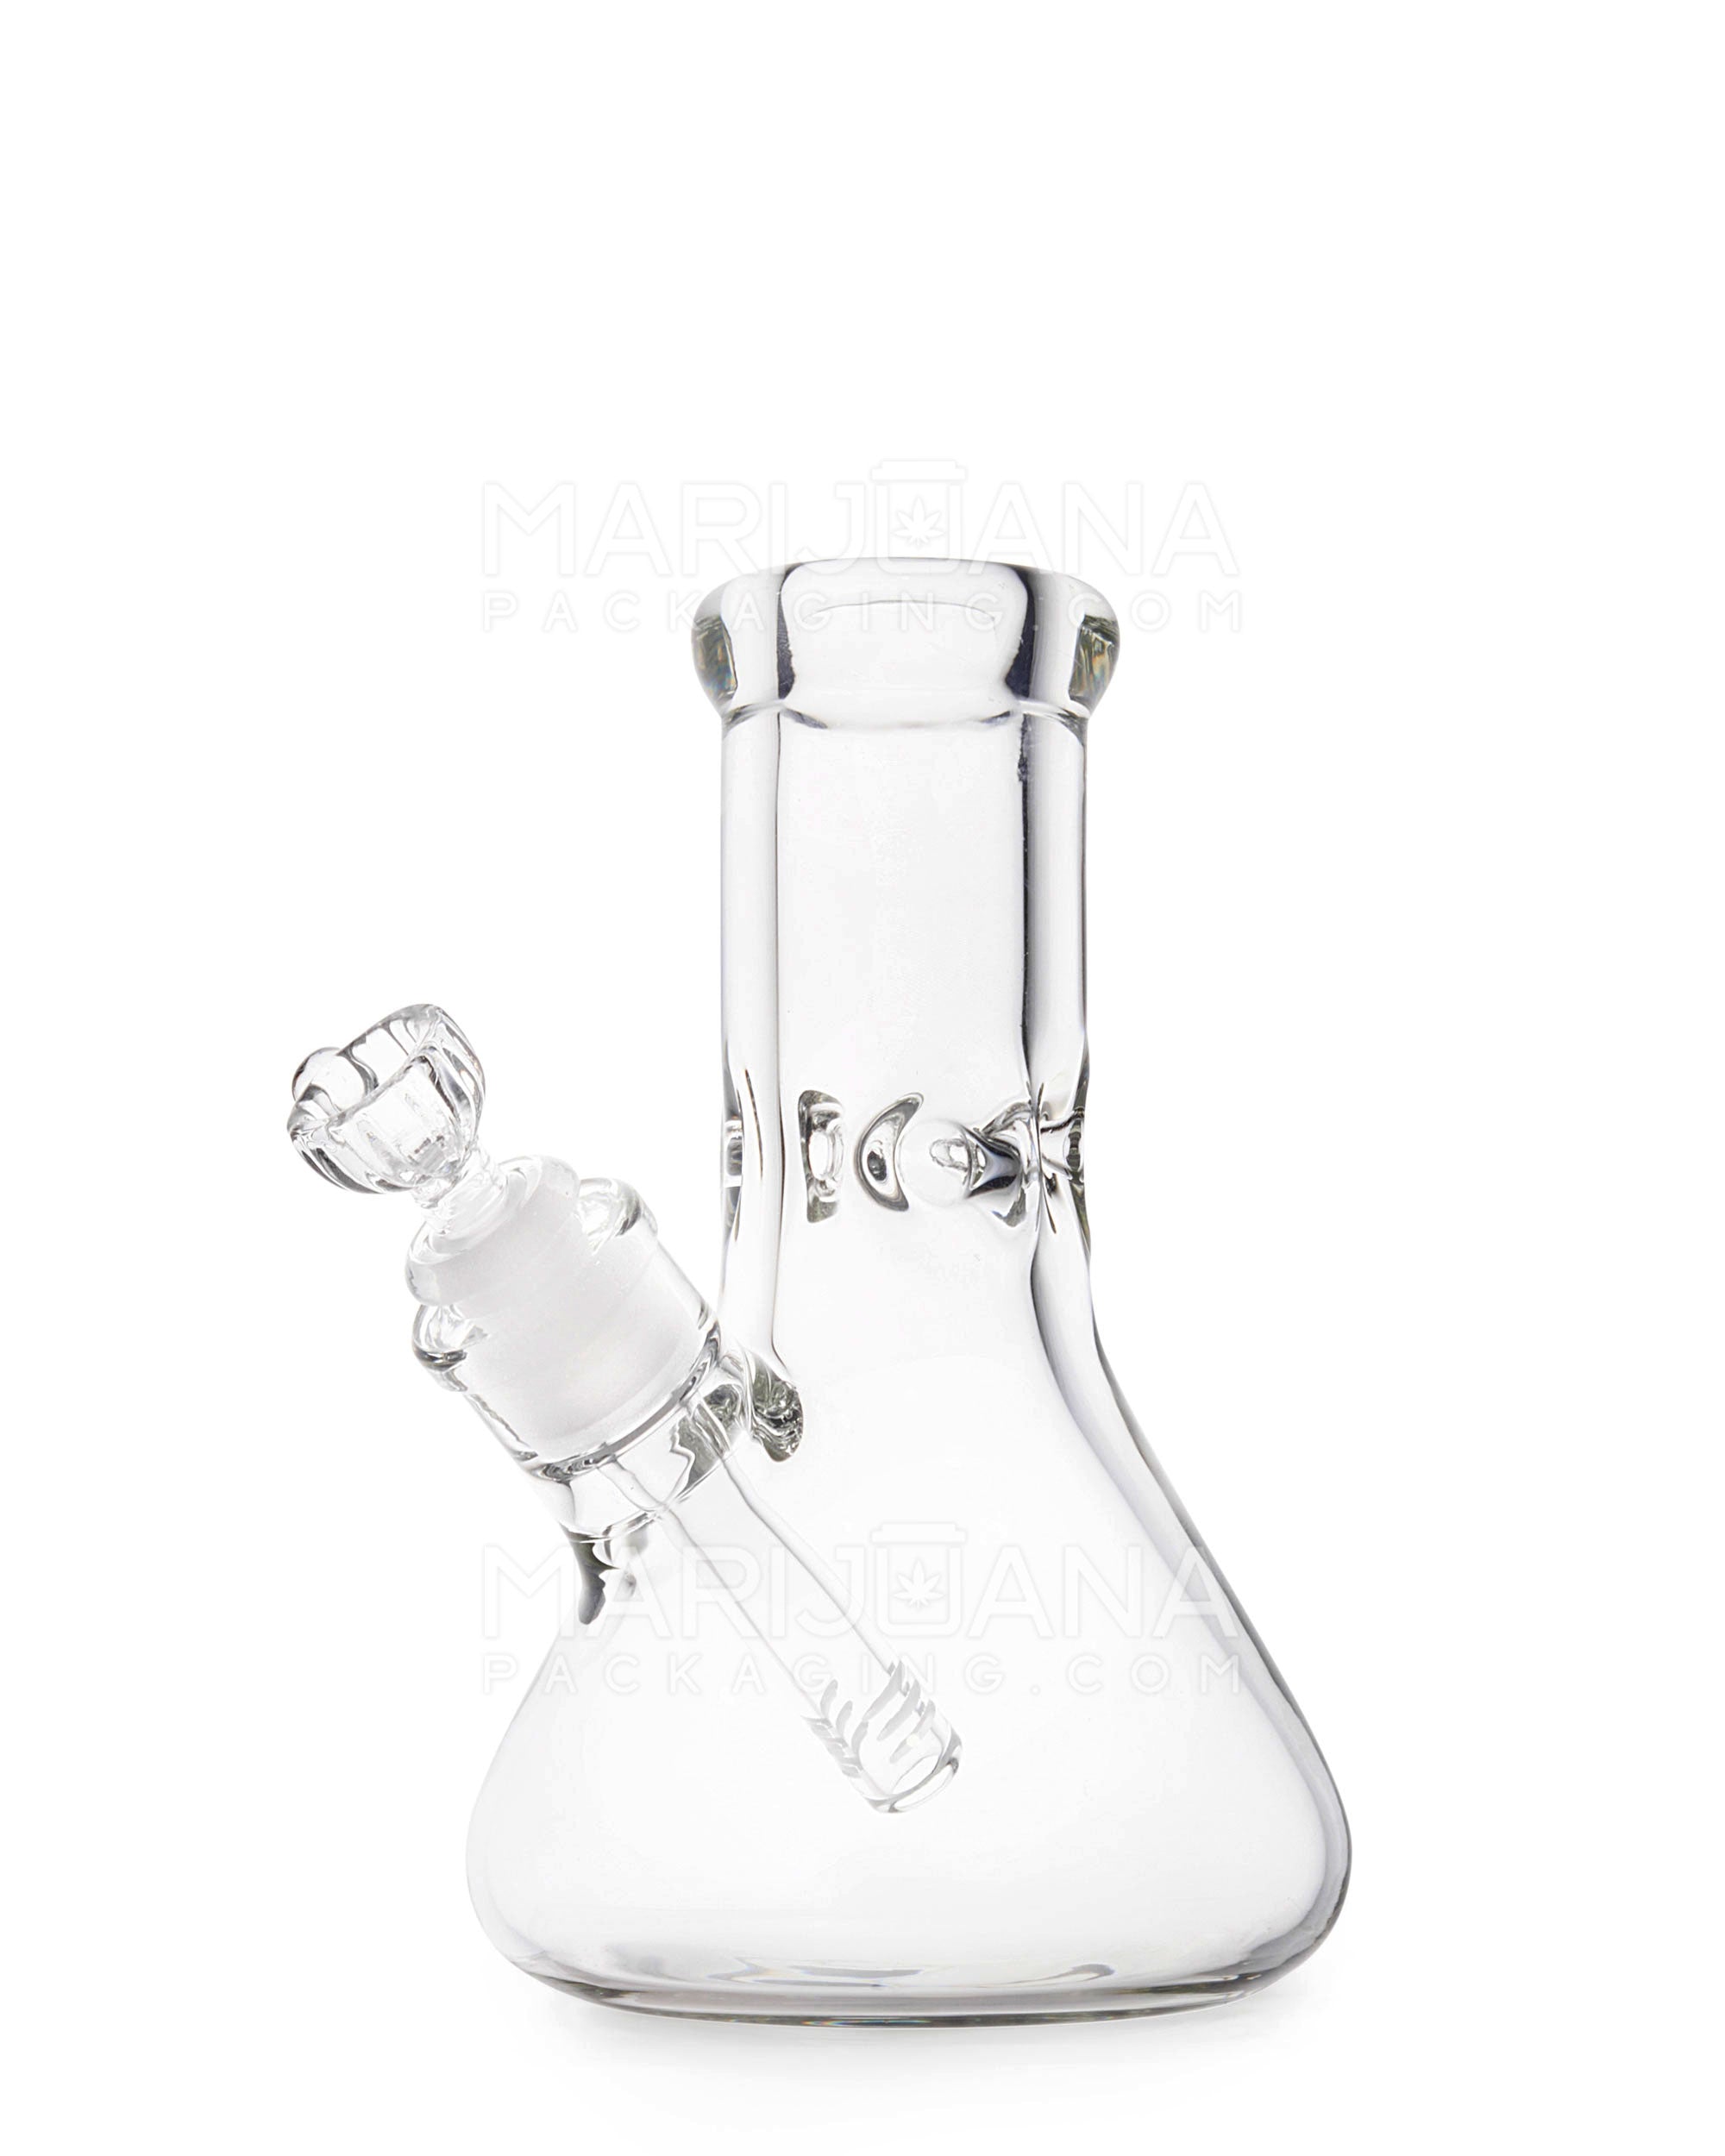 USA Glass | Straight Neck Big Beaker Glass Water Pipe w/ Ice Catcher | 8in Tall - 14mm Bowl - Clear